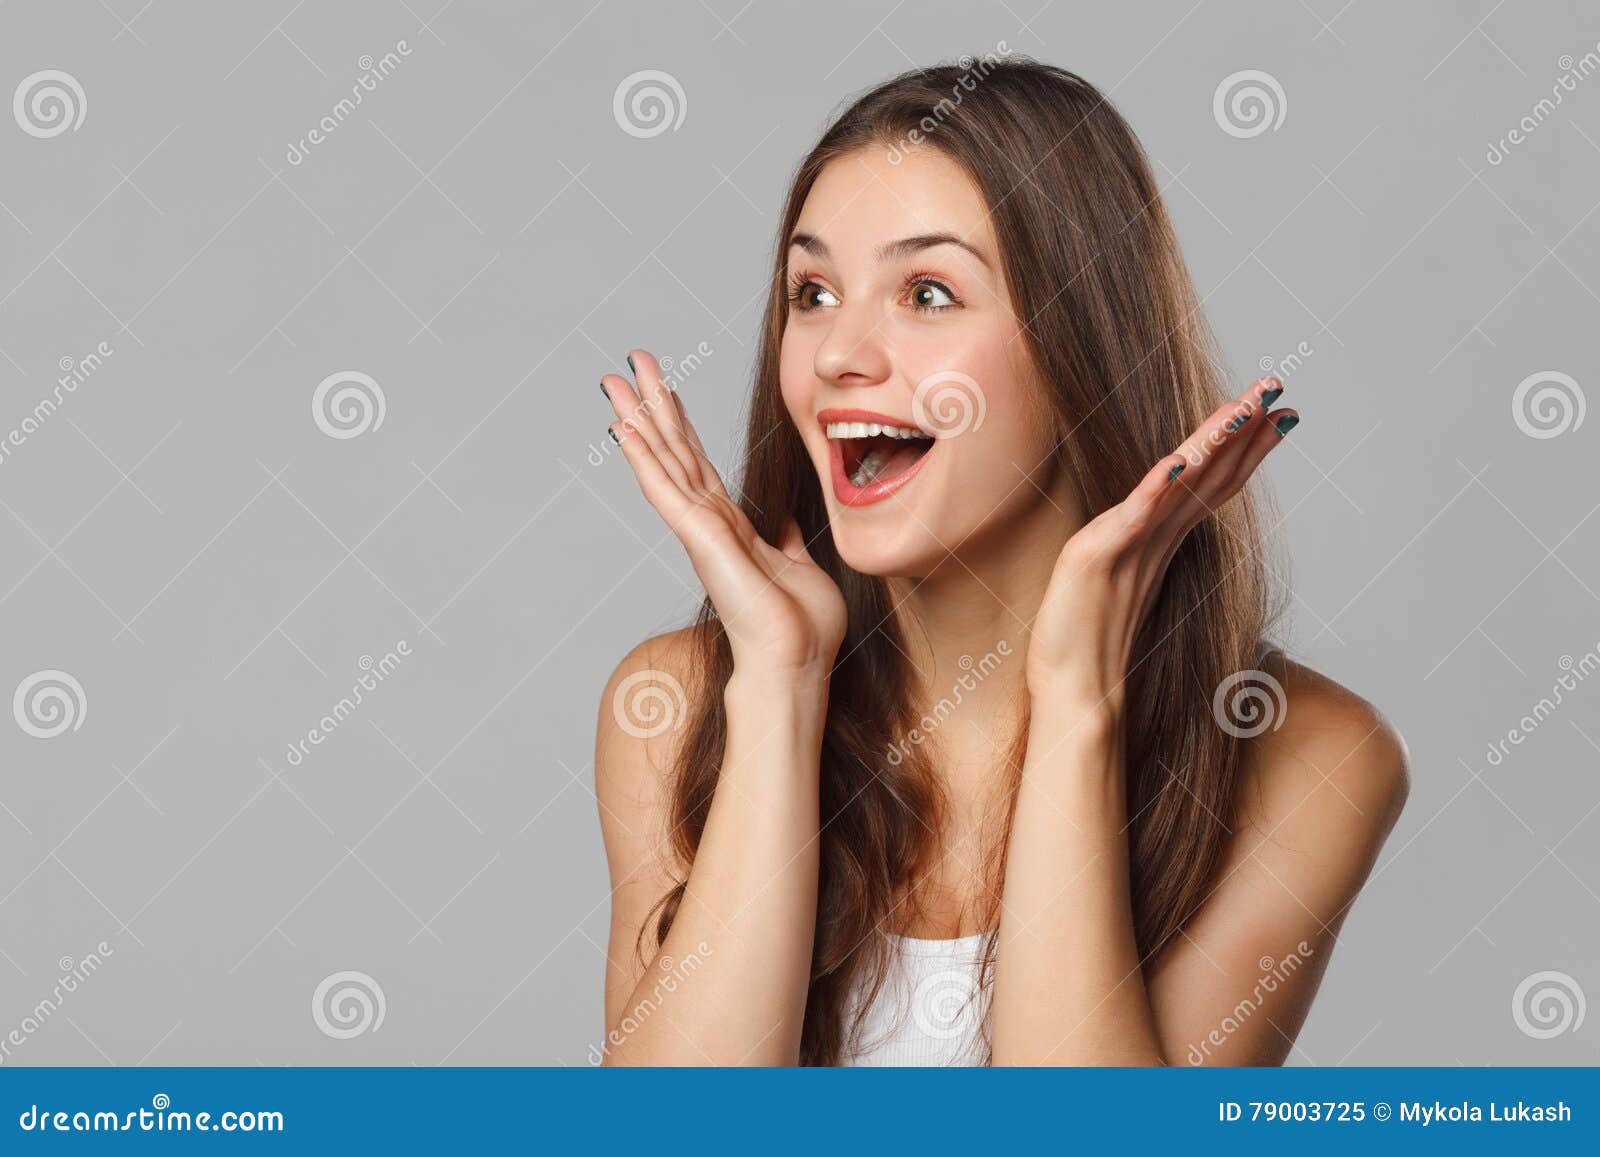 surprised happy beautiful woman looking sideways in excitement.  on gray background